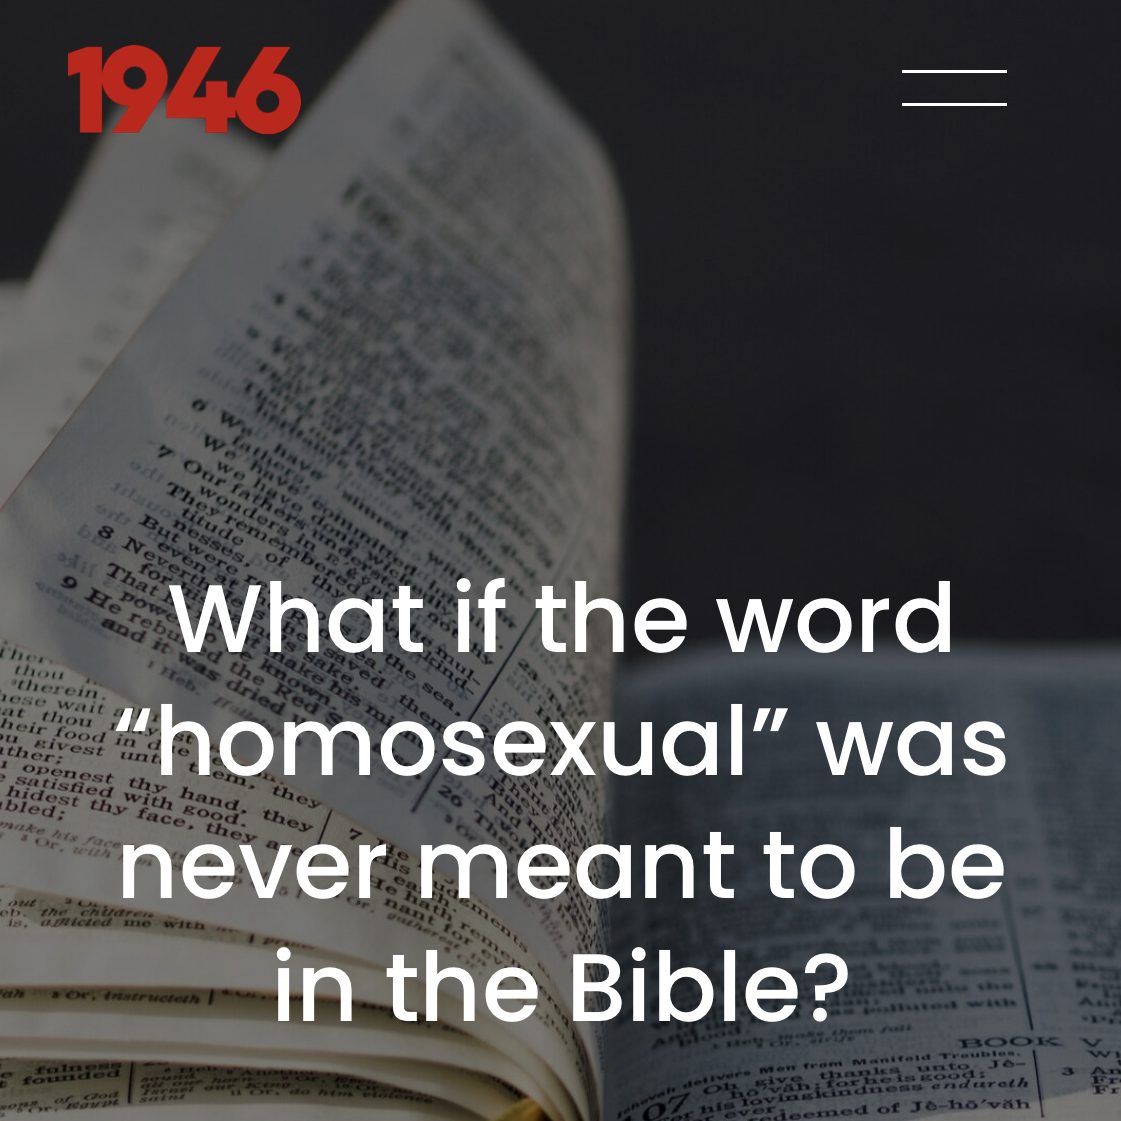 Documentary “1946” Alleges The Word Homosexual Is in the Bible by Mistake – COOL HUNTING®